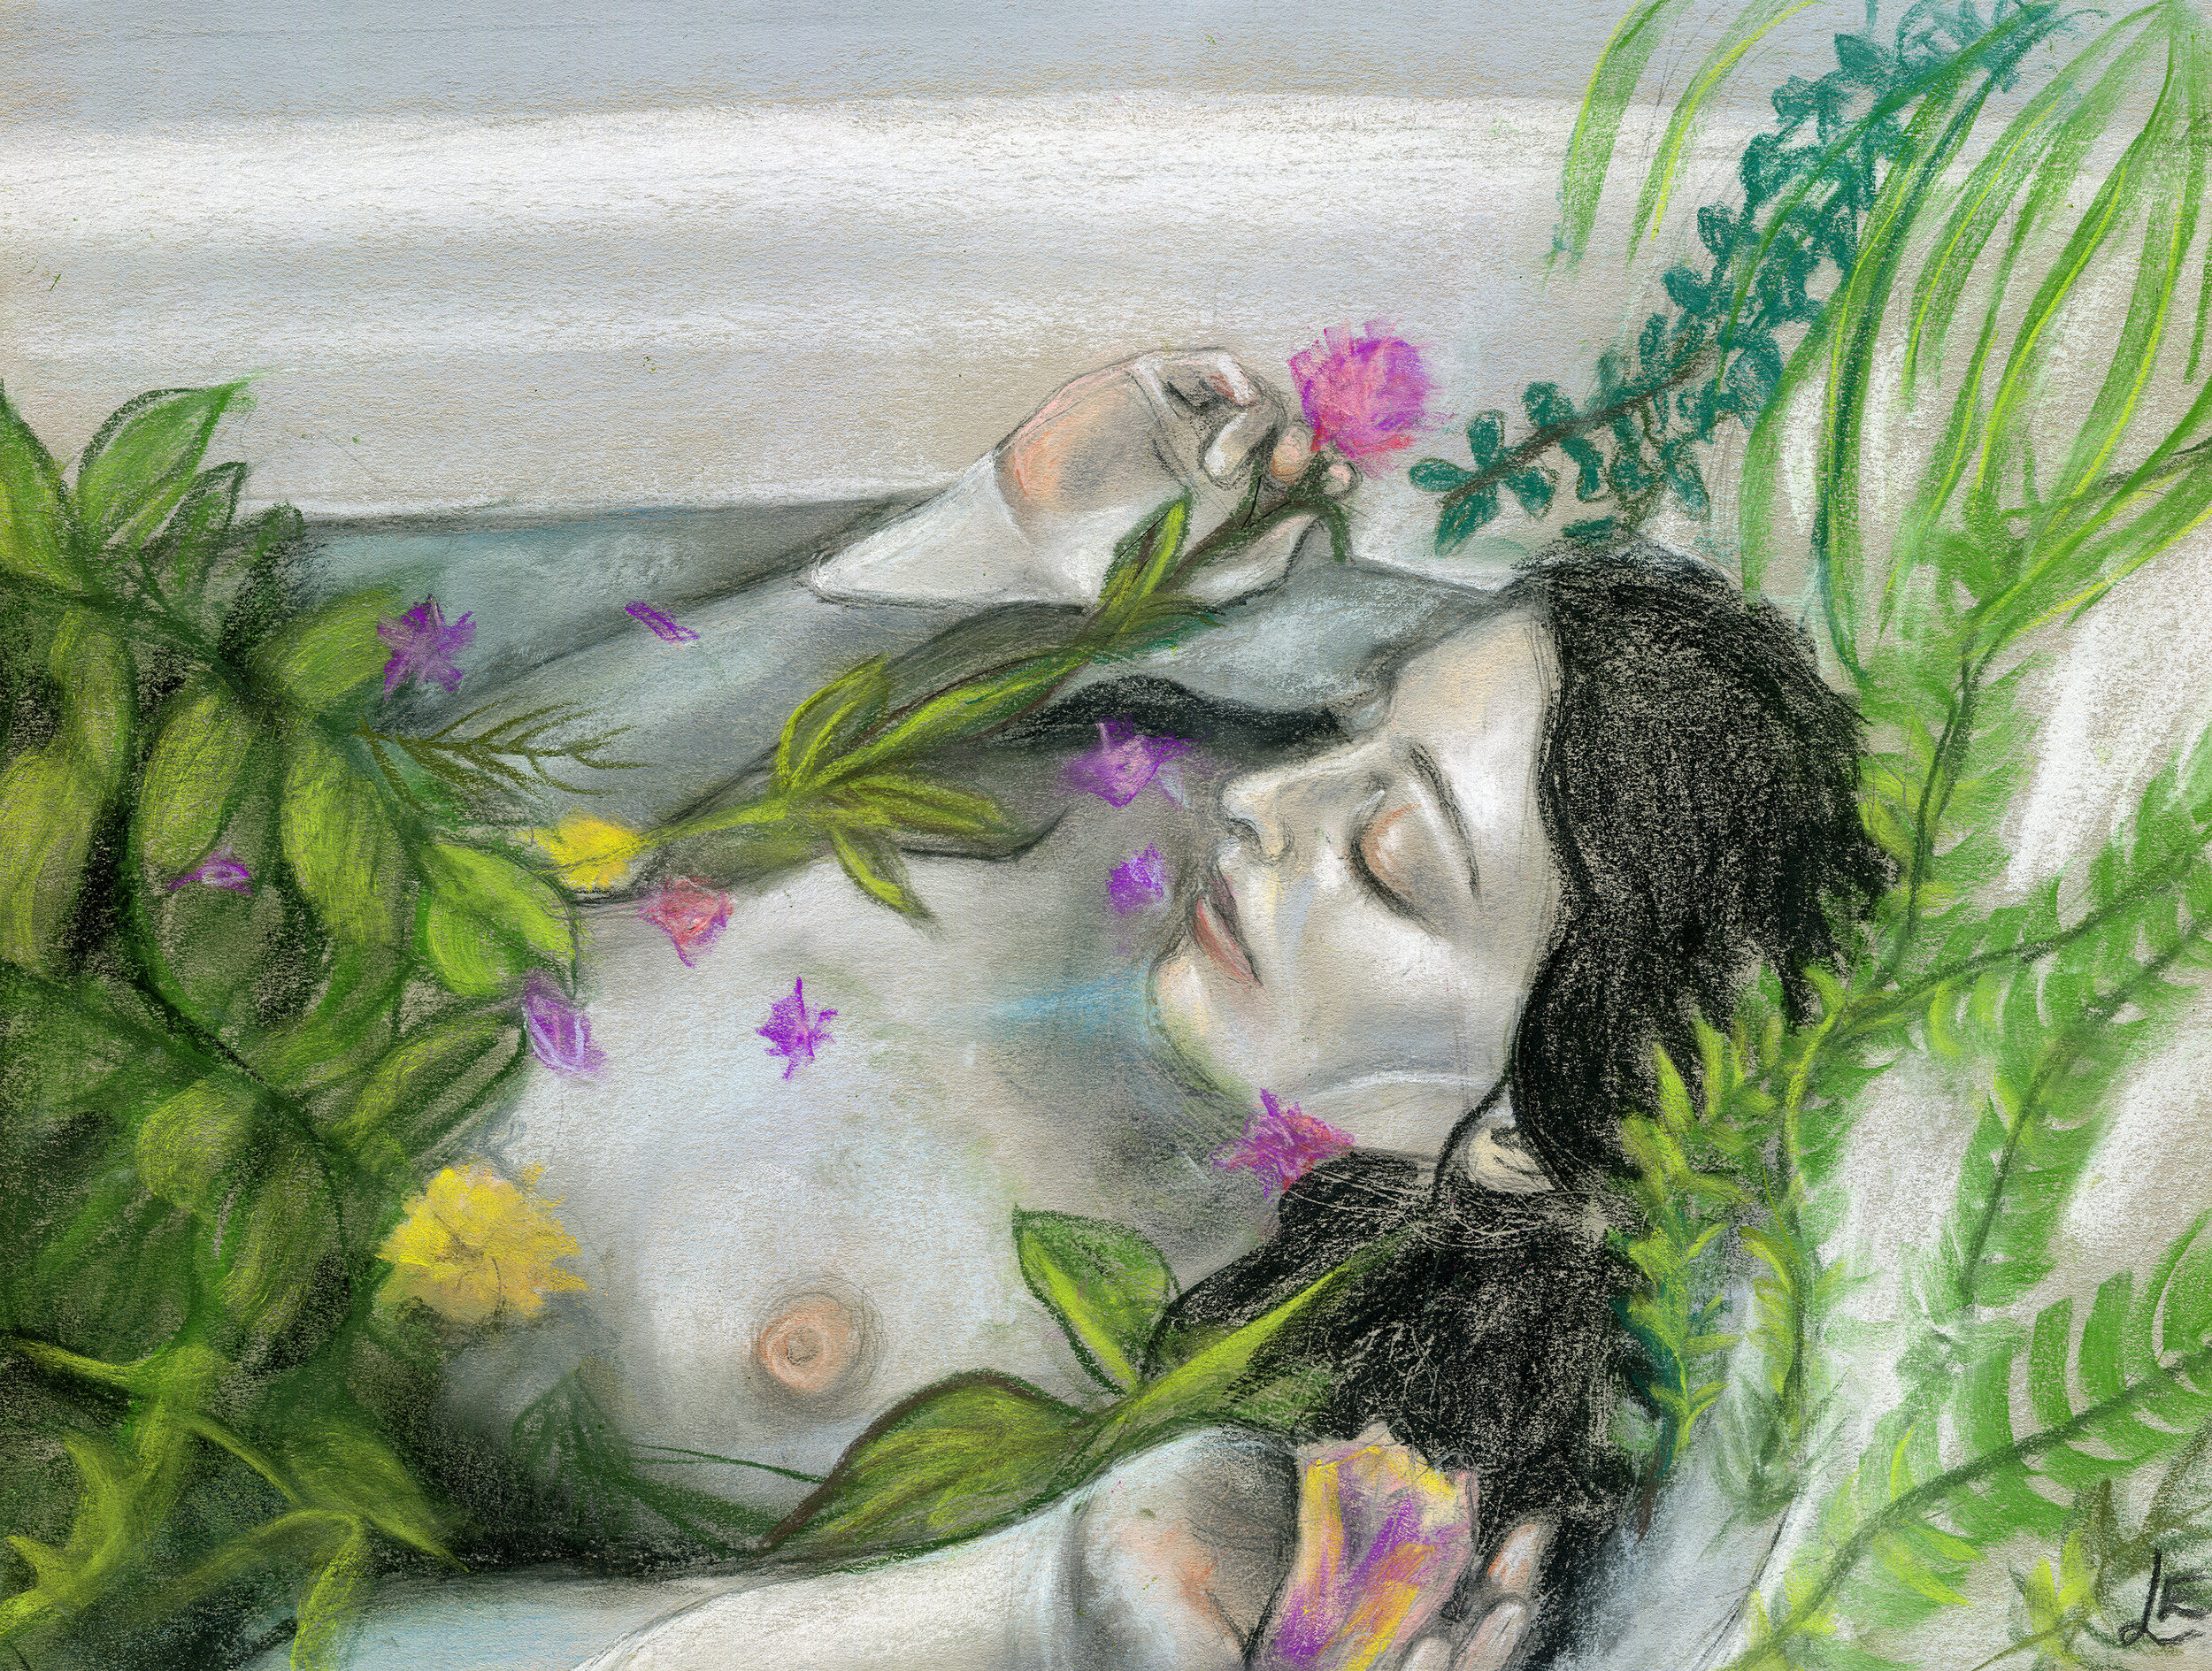 Daintree Dreaming in the Bath II (Inspired by Ophelia)